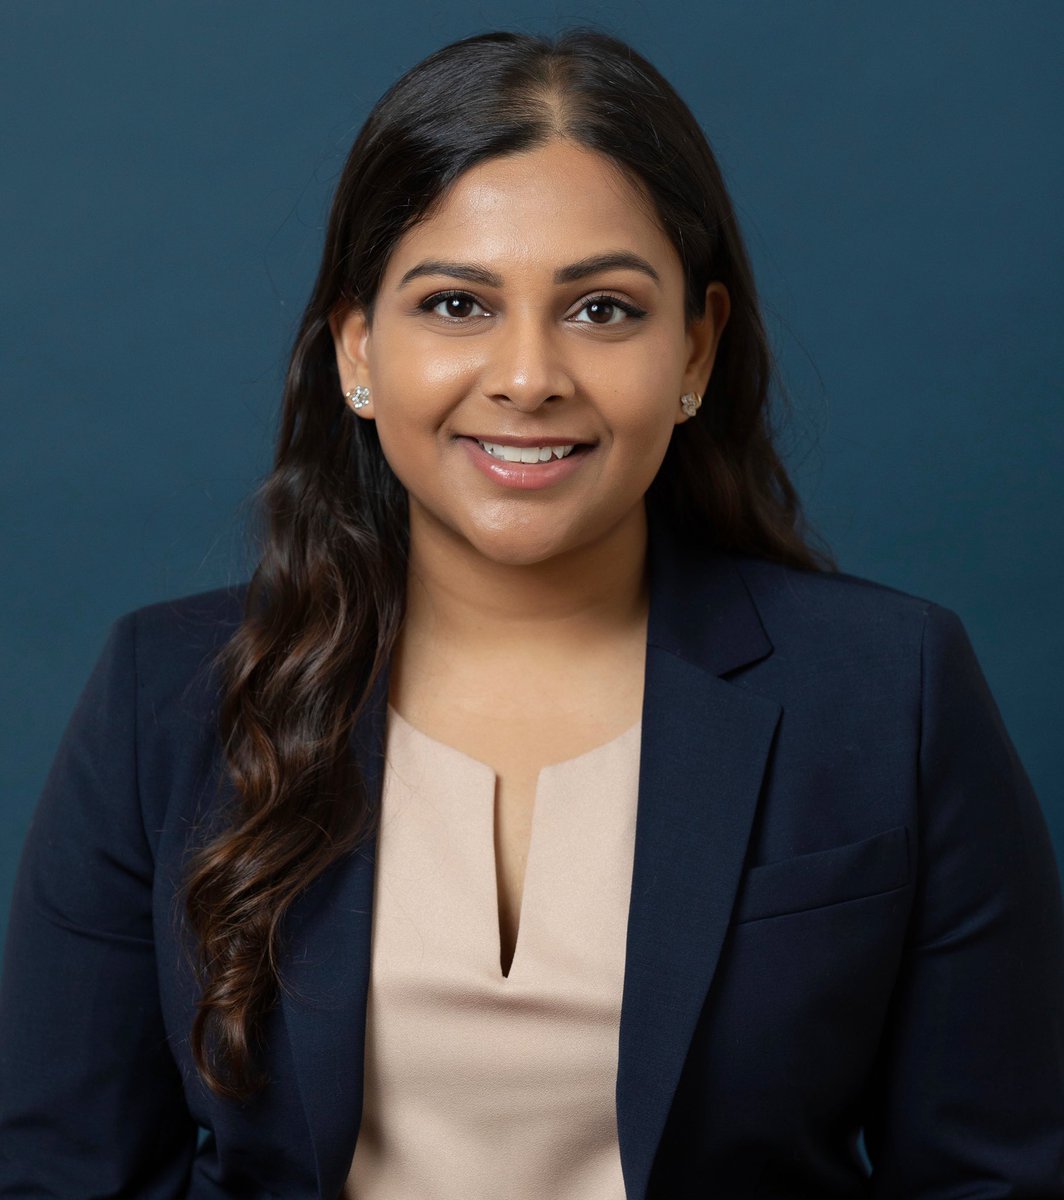 Hello #MedTwitter! I’m Jahnvi, an M4 @StonyBrookMed pursuing anesthesiology in the upcoming #Match2023. I’m highly passionate about biodesign, medical innovation, and digital health. Excited to embark on this journey and connect with you all! 😊 #gasgang #womeninanesthesia